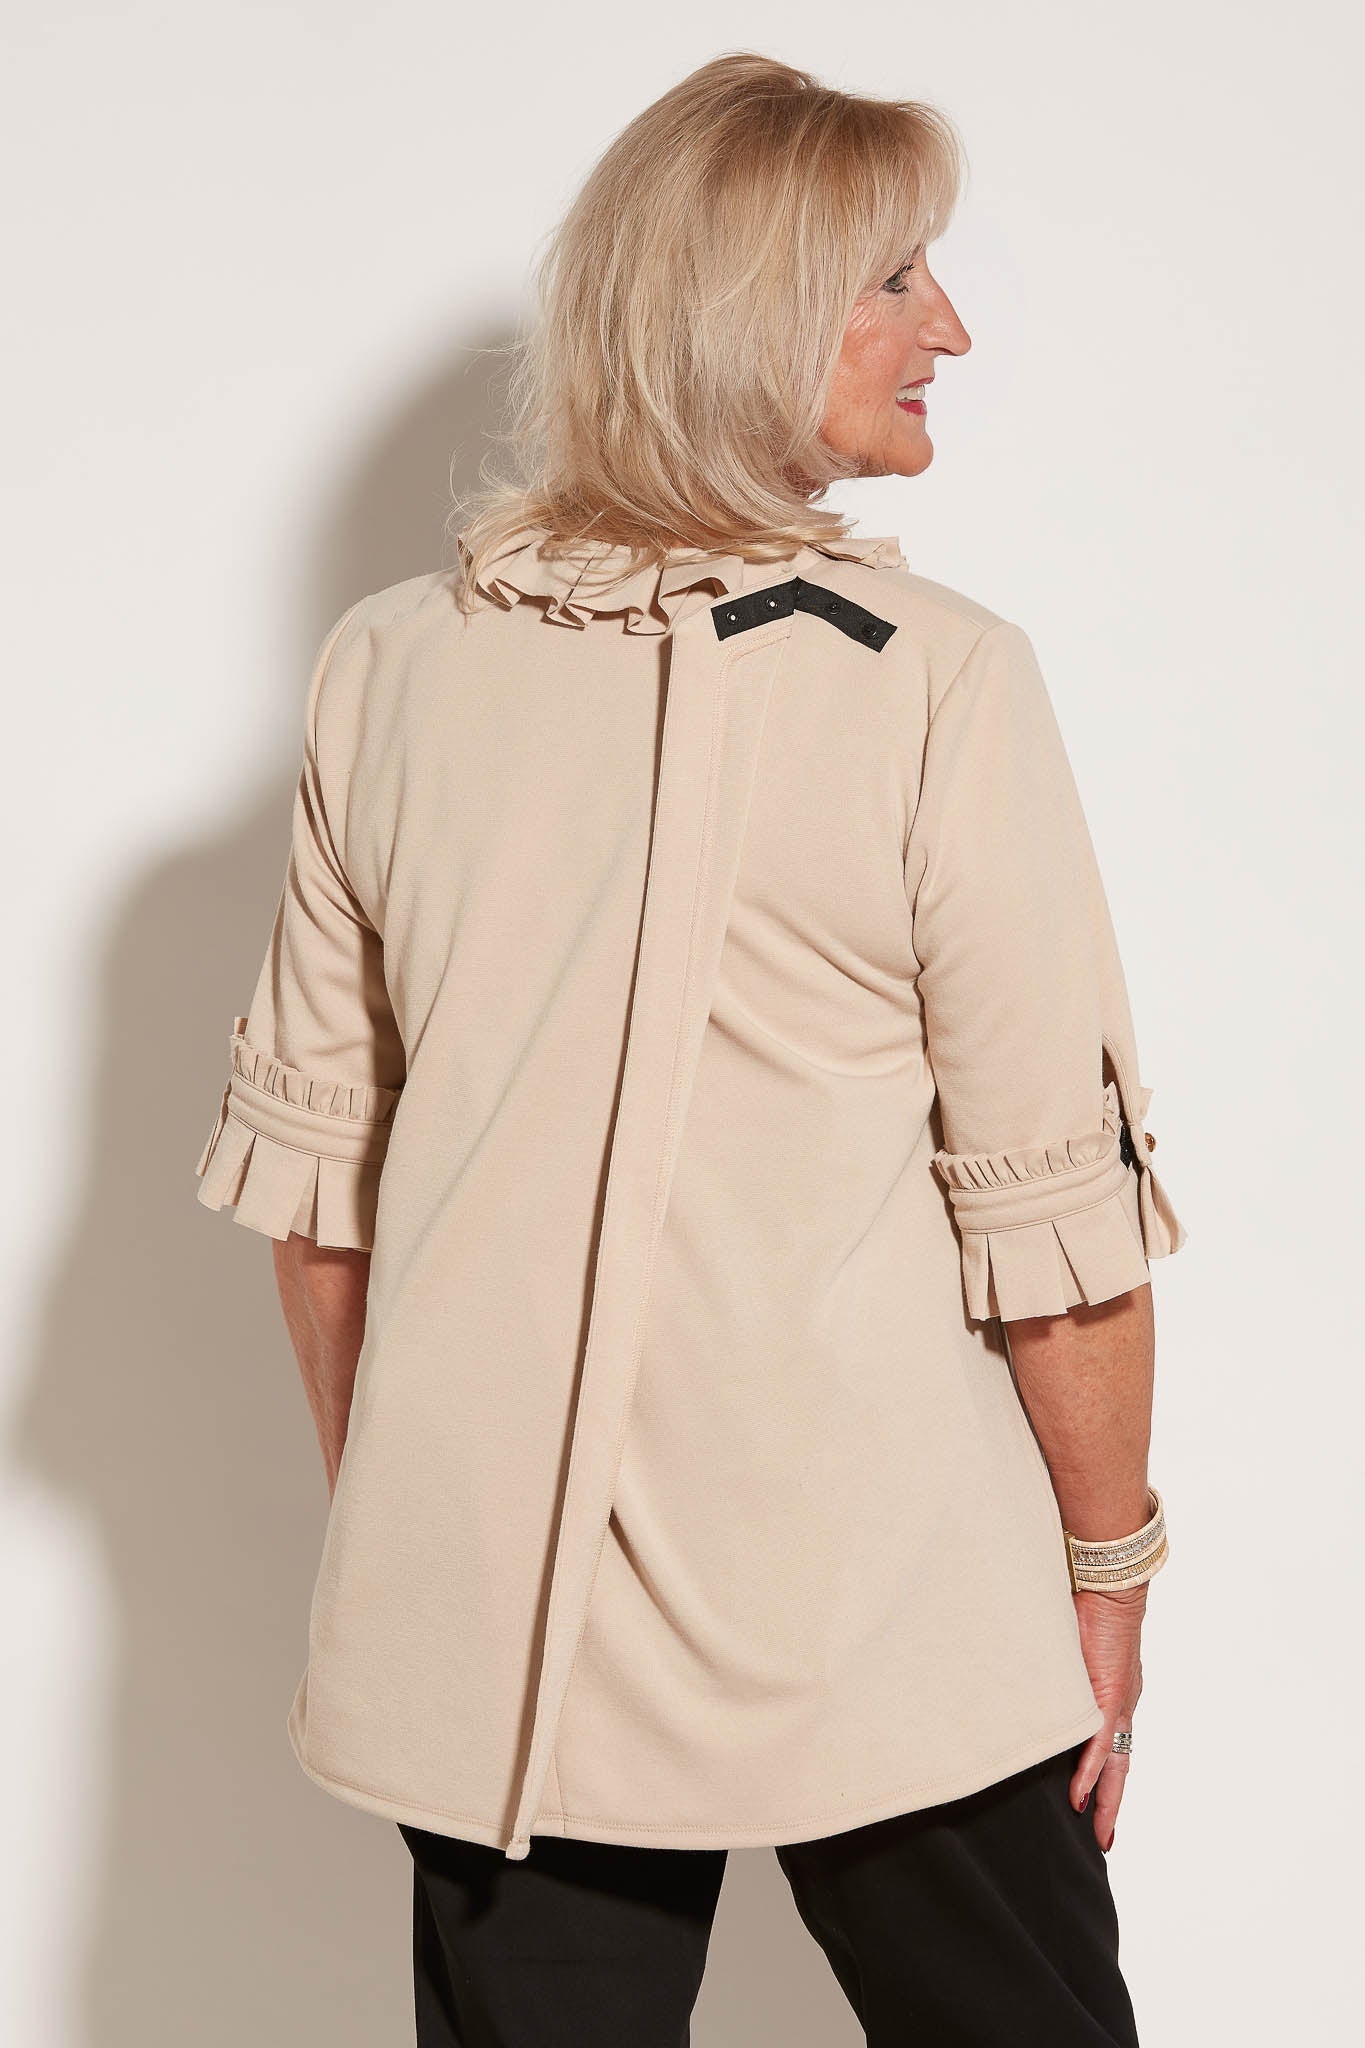 Senior Womens Assisted Dressing Top | Art in Aging